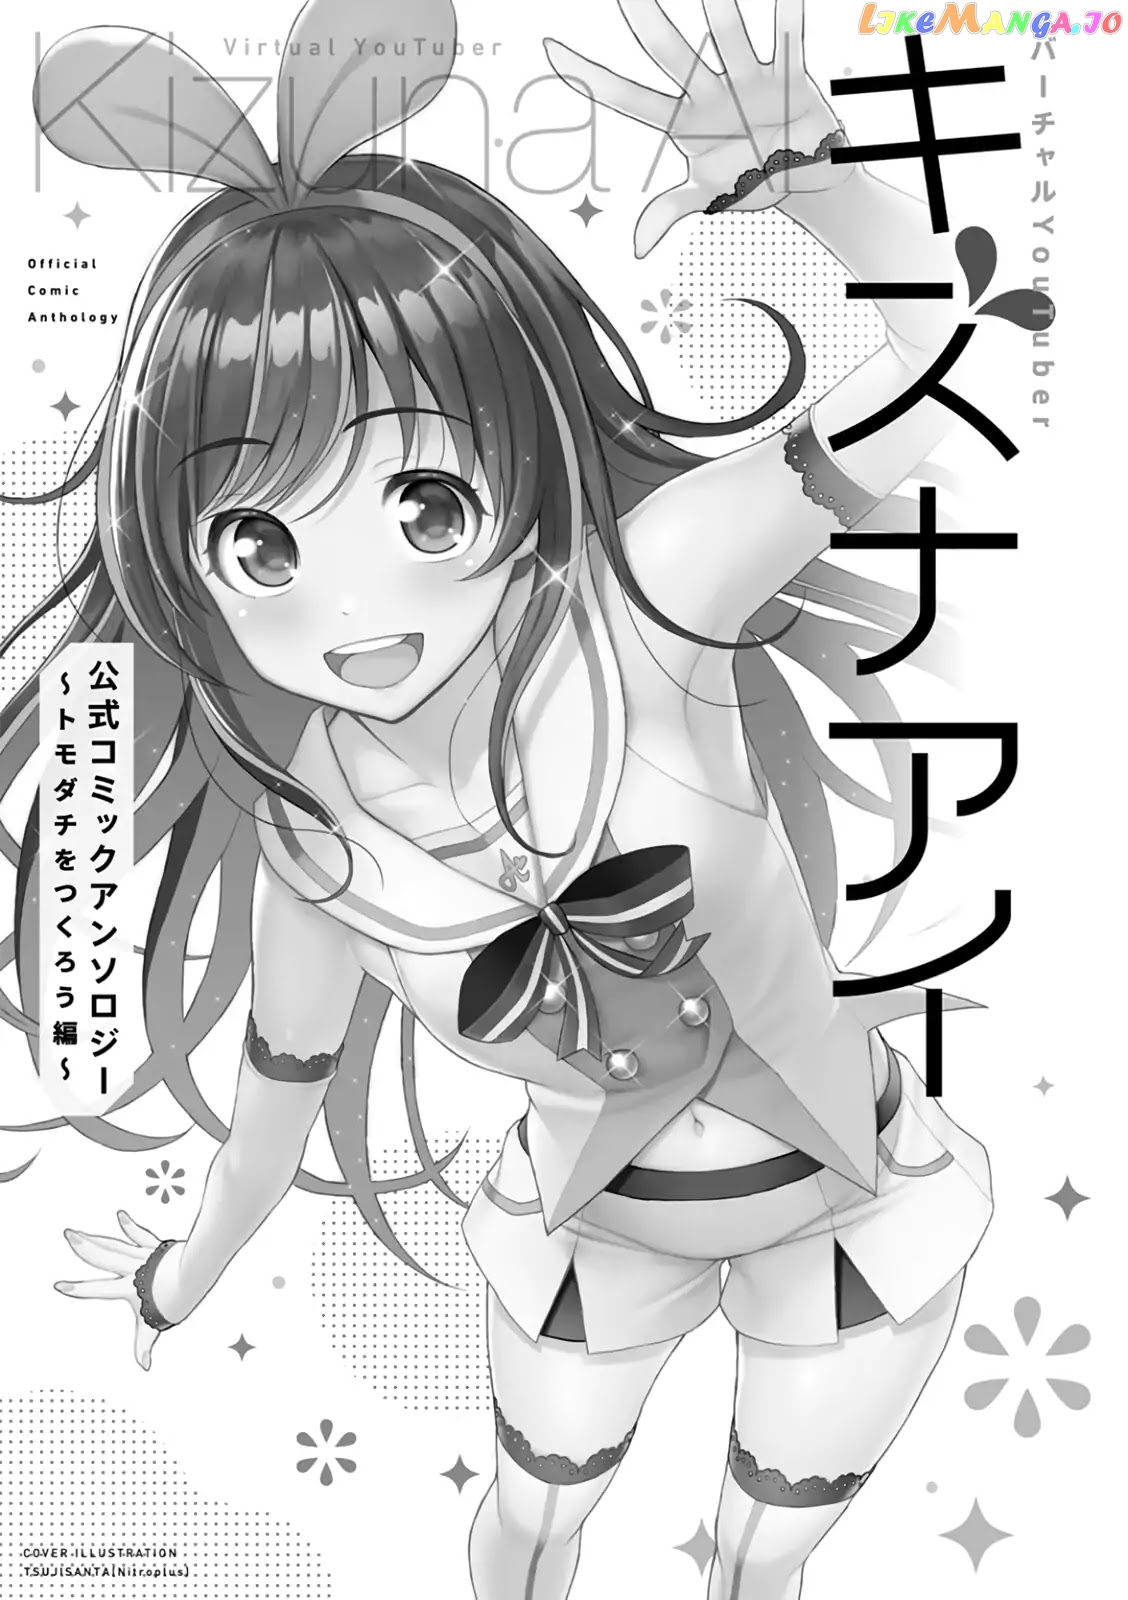 Virtual YouTuber Kizuna AI Official Comic Anthology chapter 1 - page 4